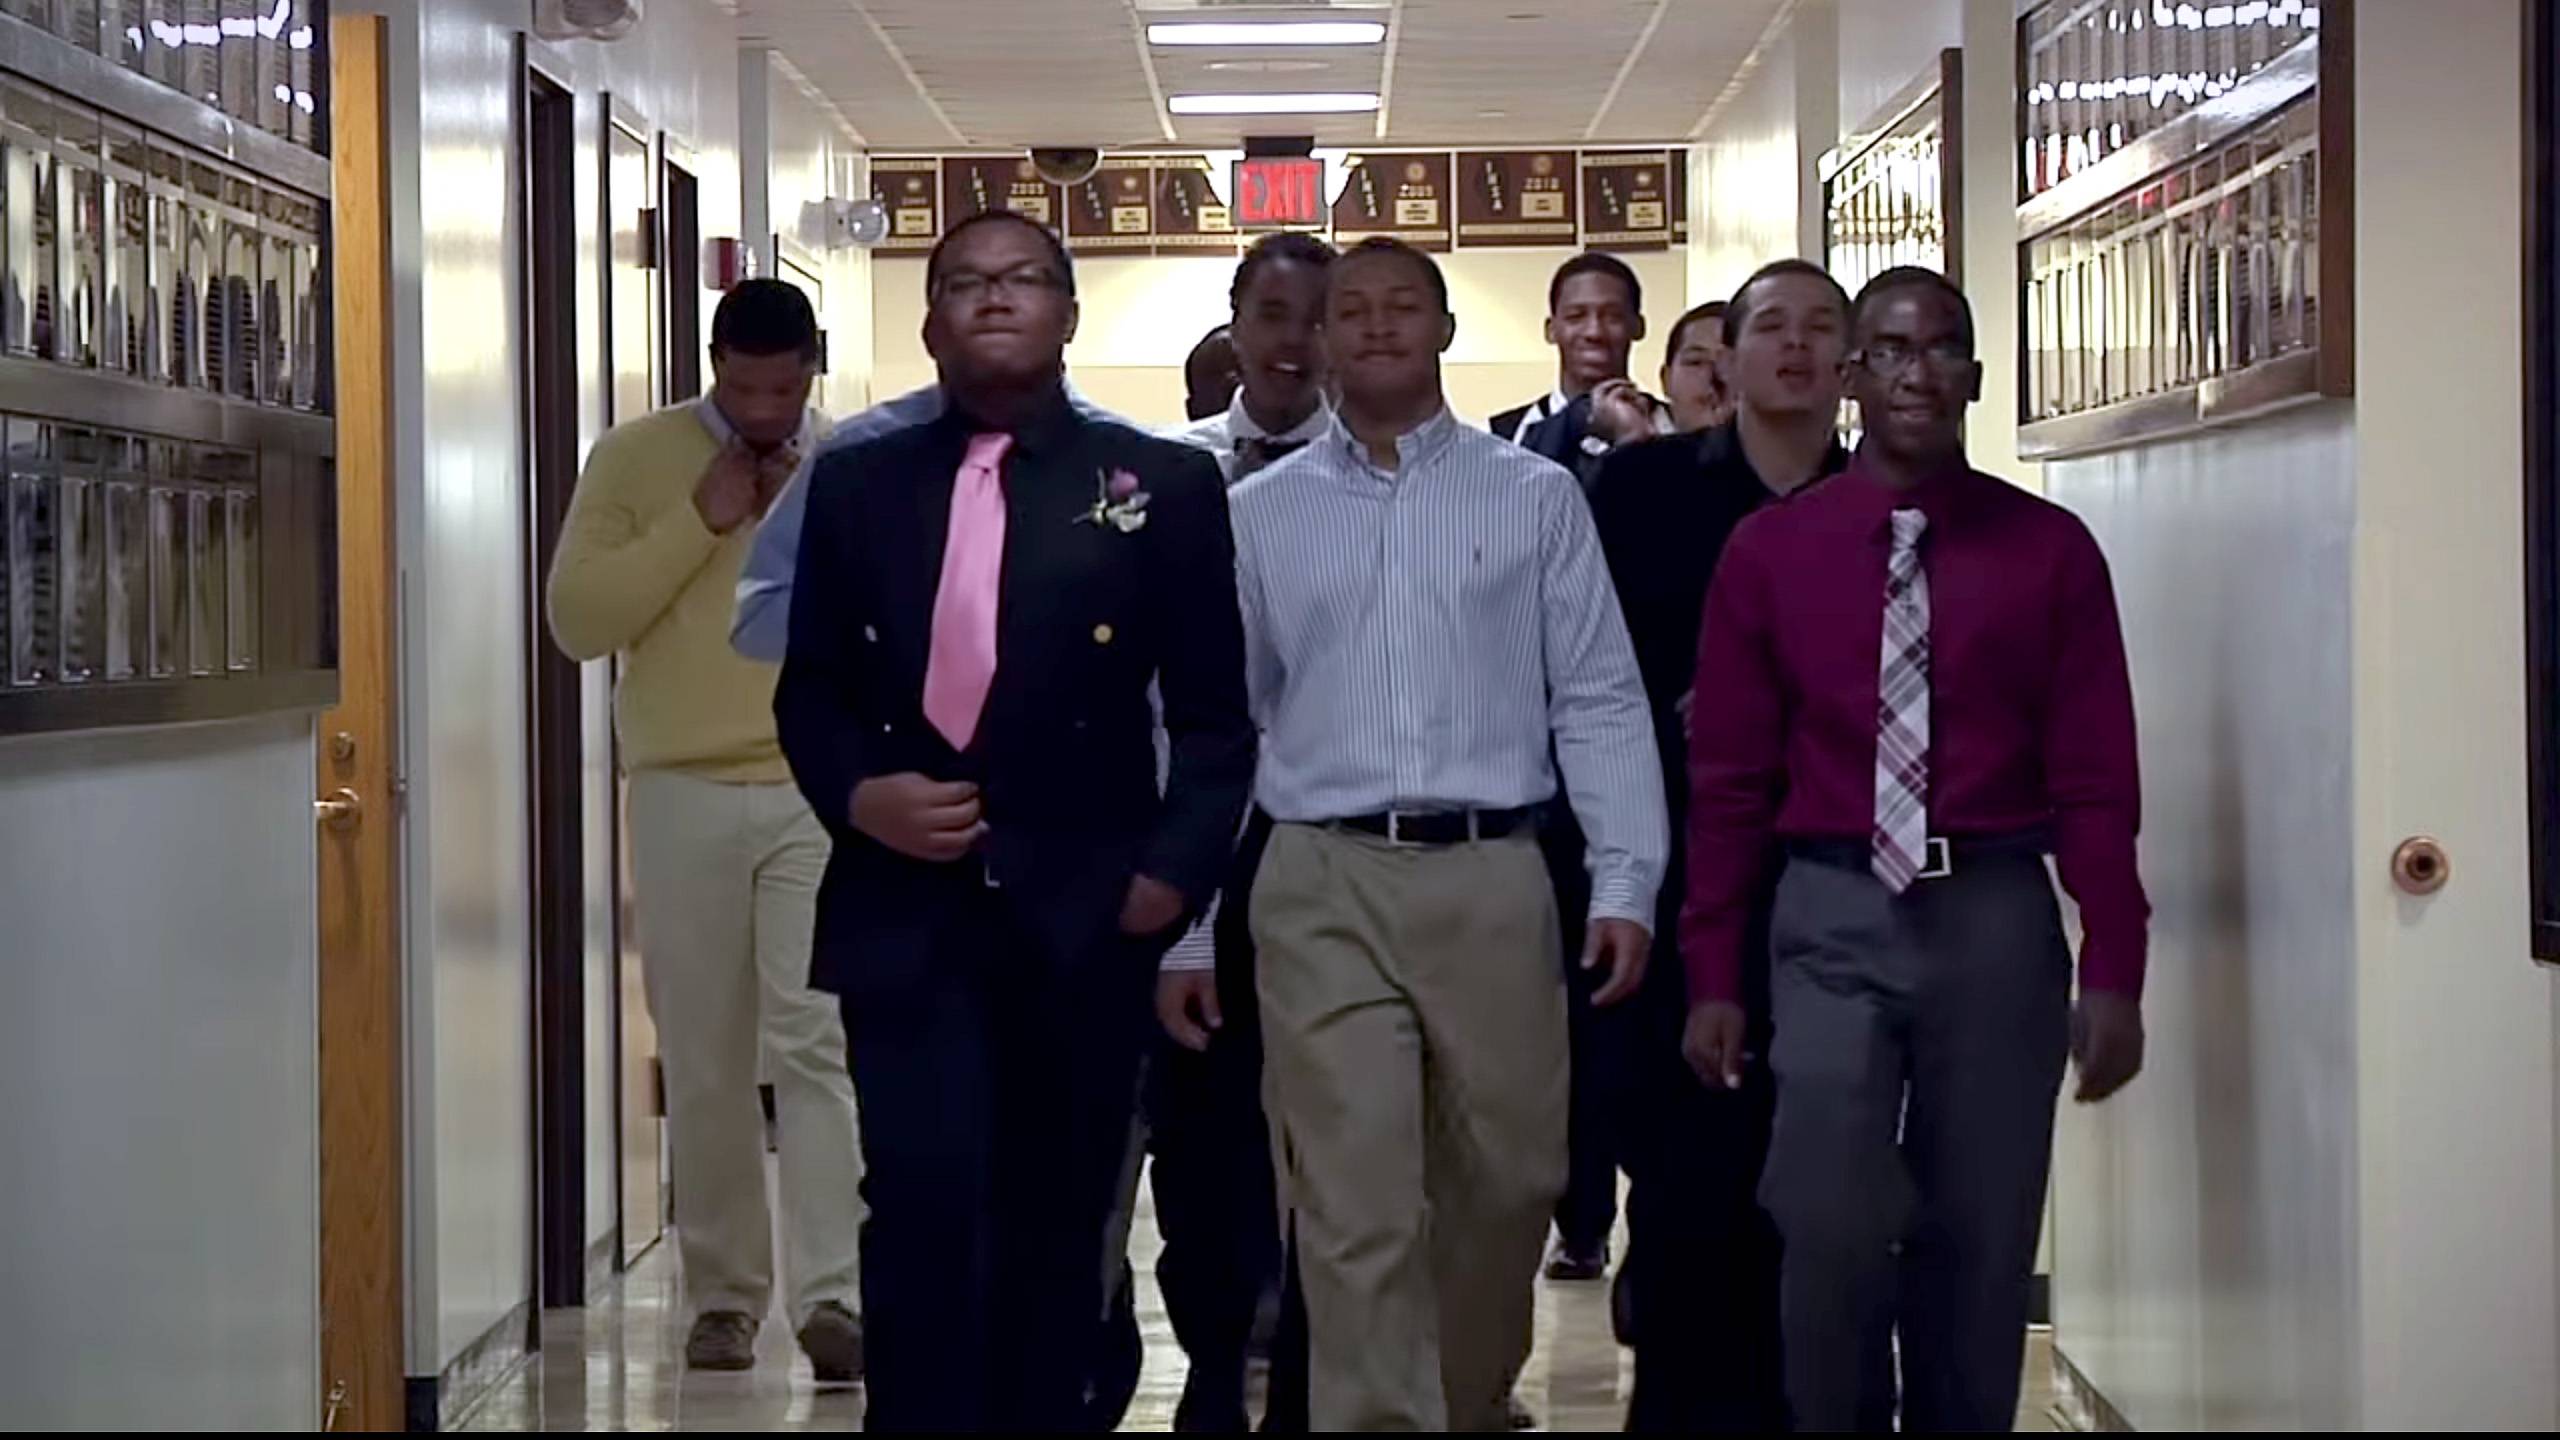 Black HS Students’ ‘Suit and Tie’ Video Goes Viral